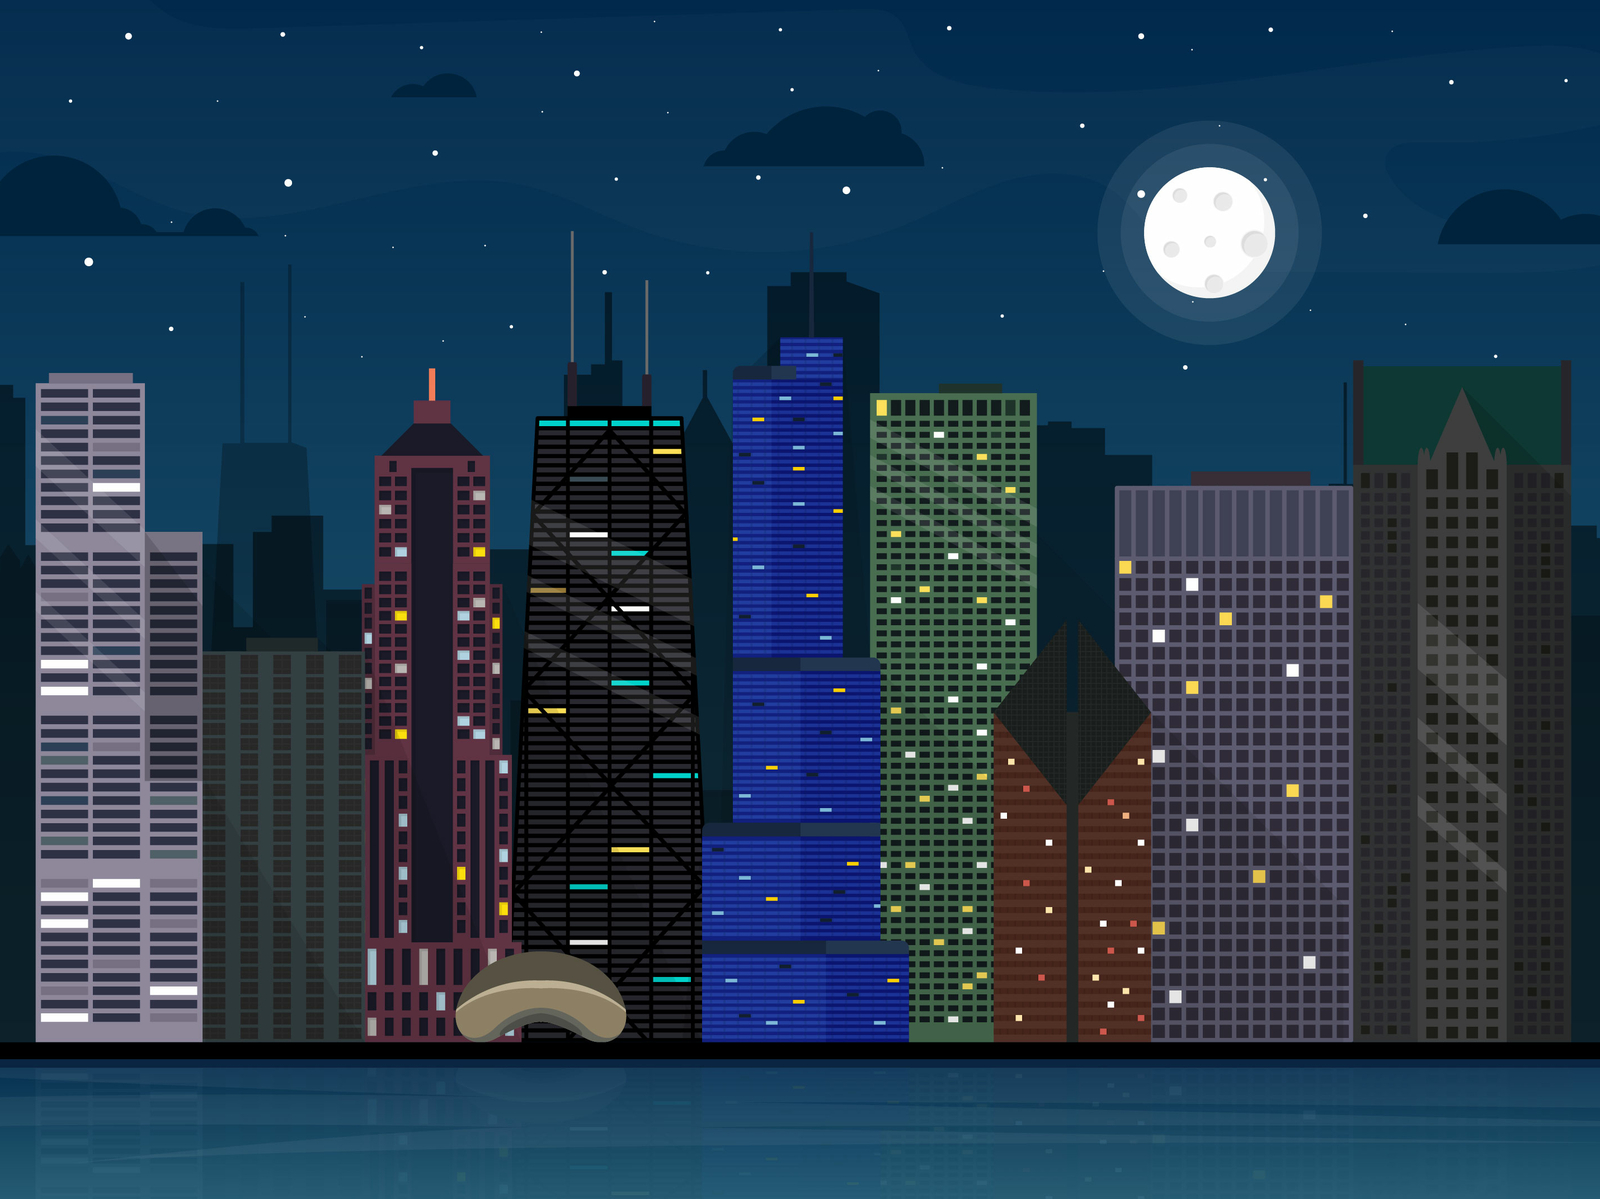 Chicago by Numan Fareed on Dribbble